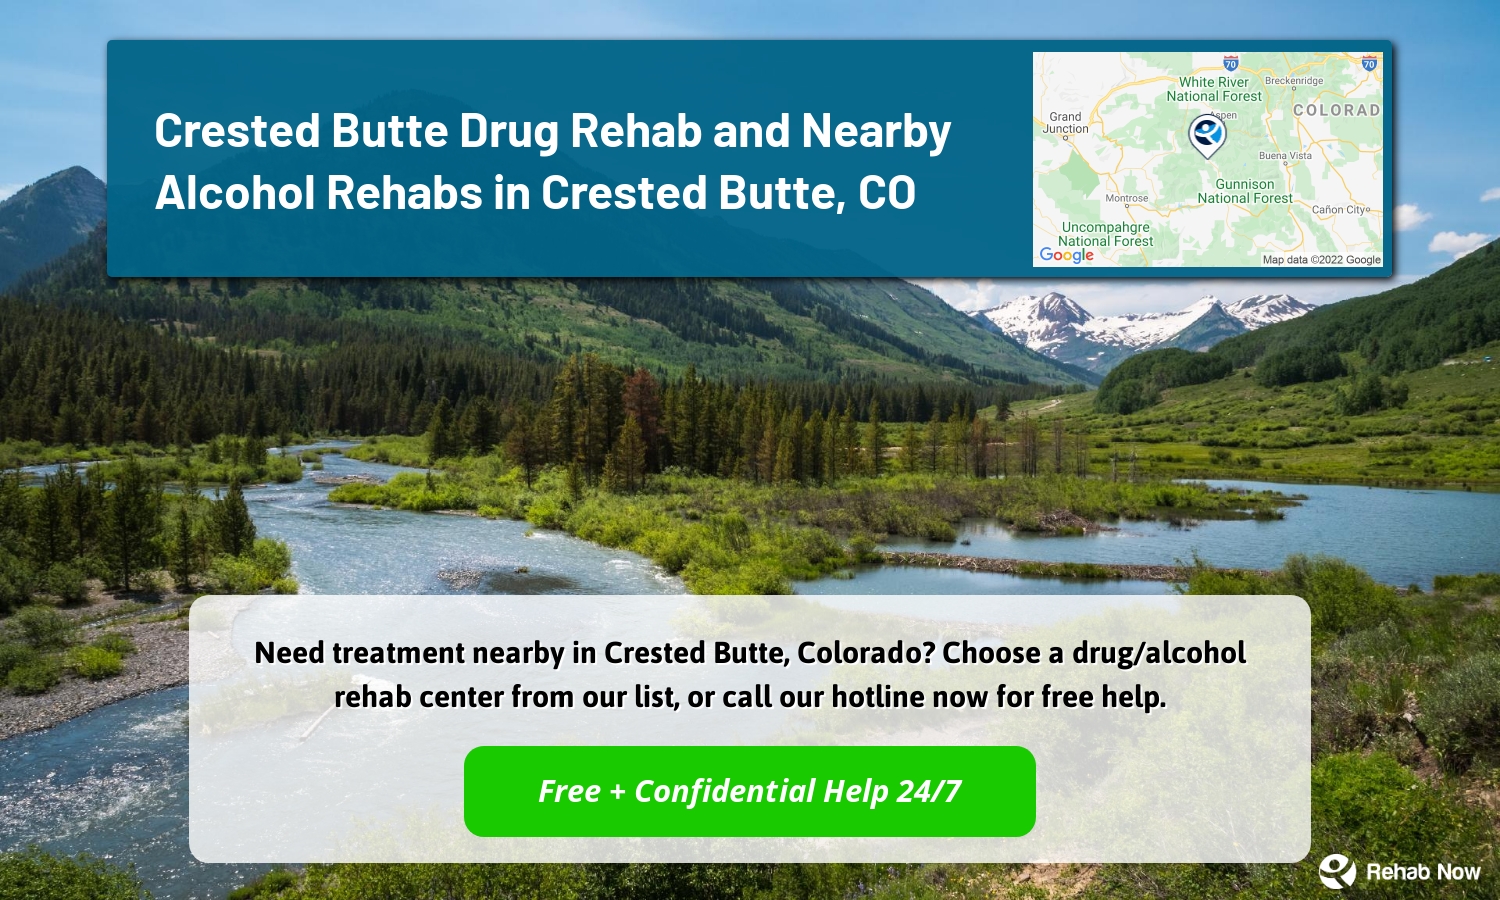 Need treatment nearby in Crested Butte, Colorado? Choose a drug/alcohol rehab center from our list, or call our hotline now for free help.